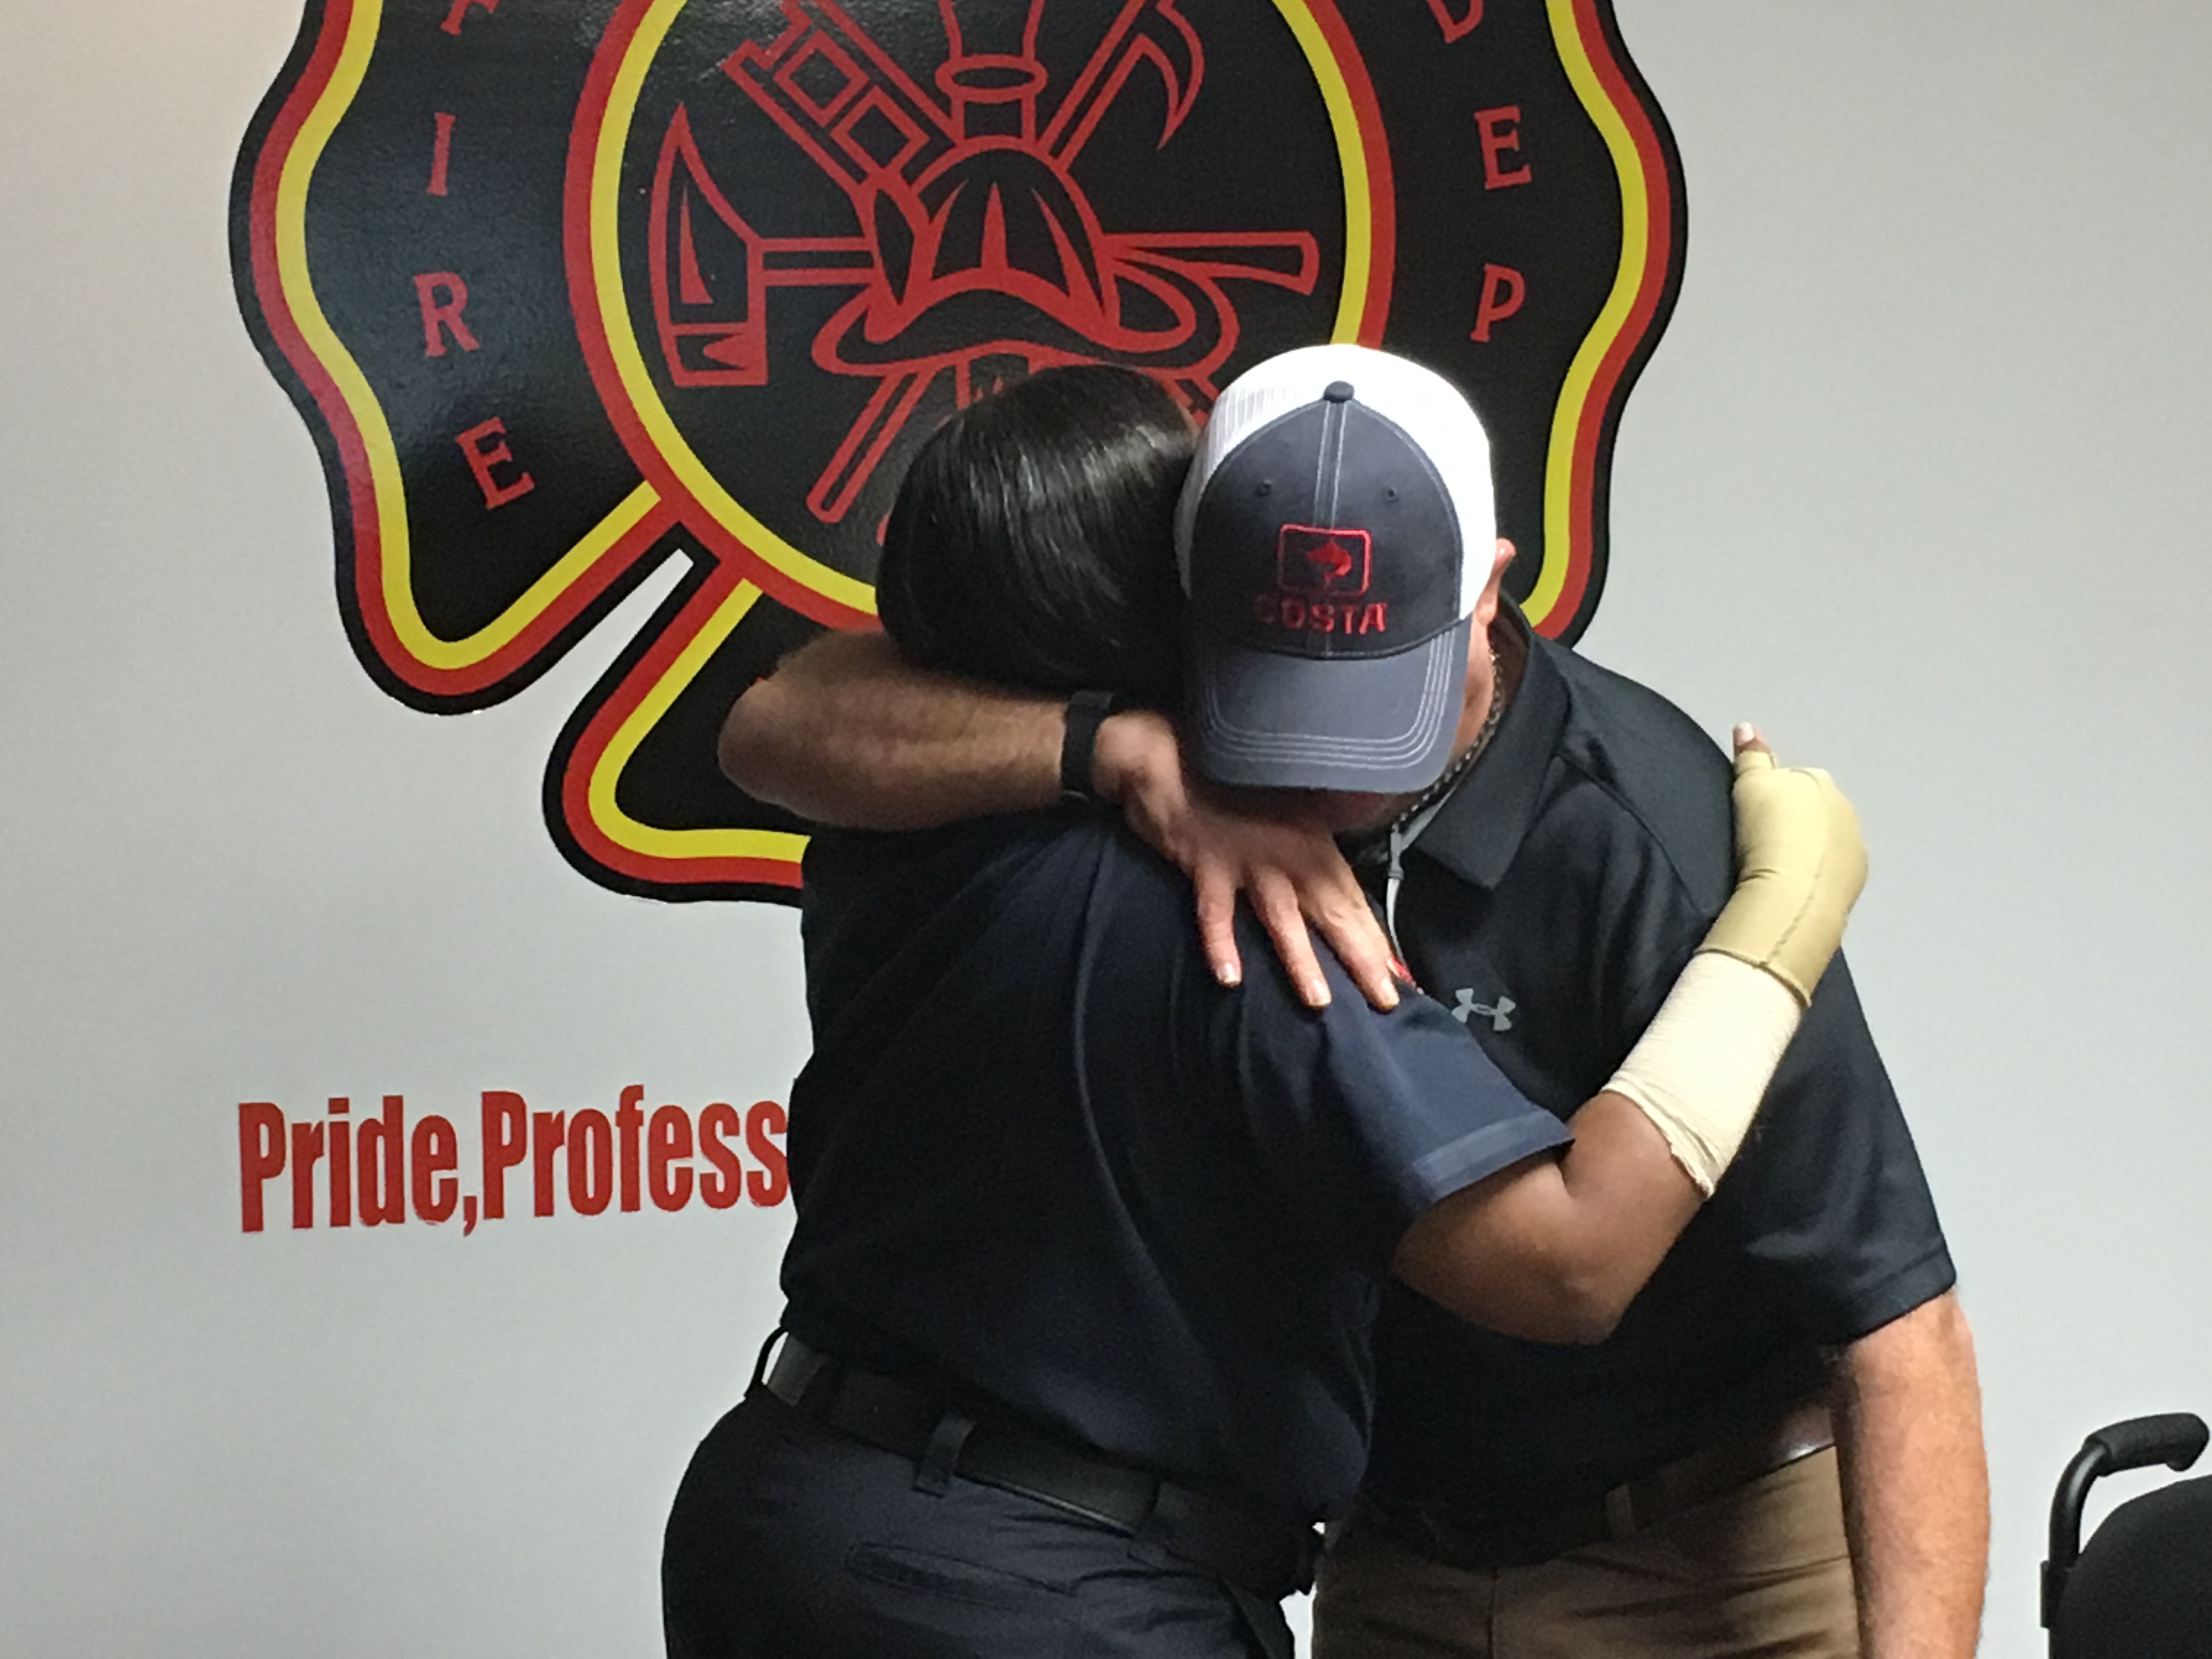 Man reunited with first responders who saved his life